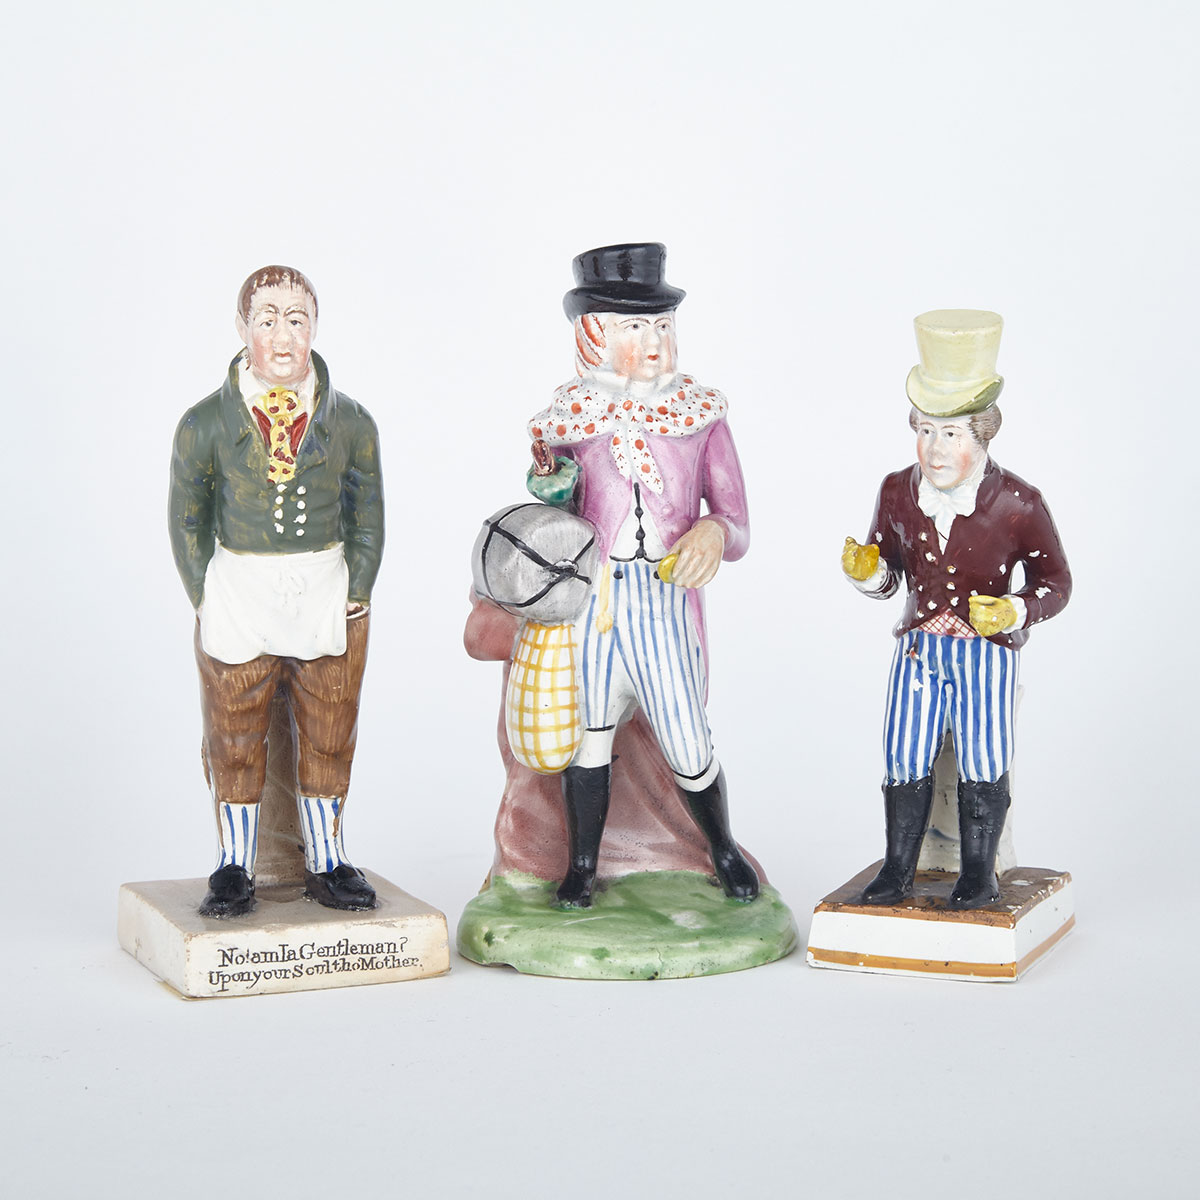 Three Staffordshire Pearlware Theatrical Figures of John Liston as Sam Swipes in ‘Exchange no Robbery’, Lubin Log in ‘Love, Law and Physic’ and as Paul Pry in ‘Paul Pry’, c.1820-30